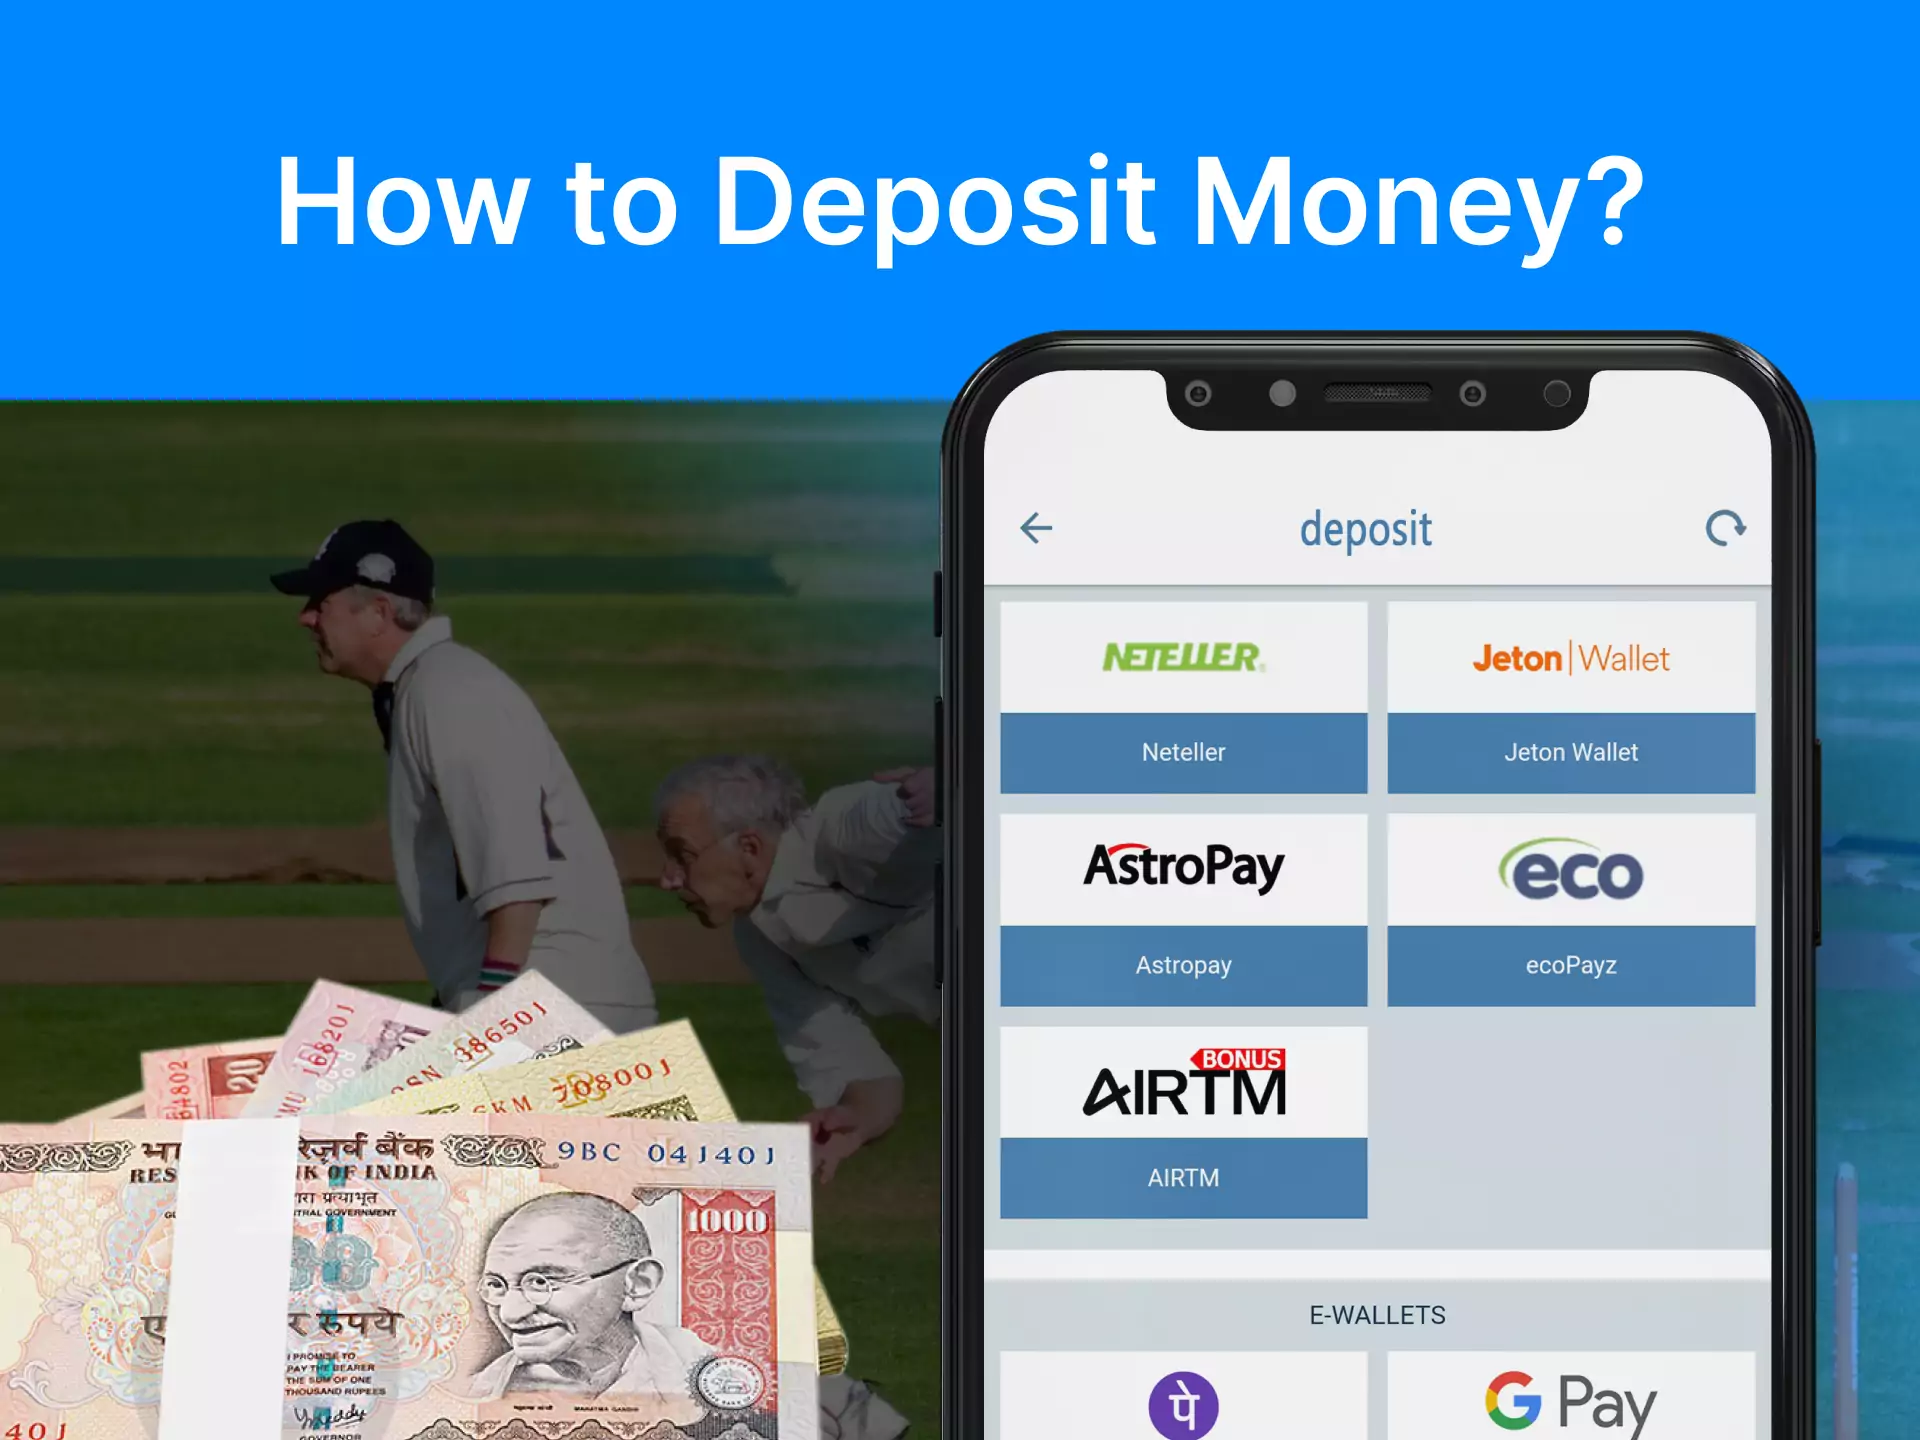 You can deposit money into your account in betting apps.